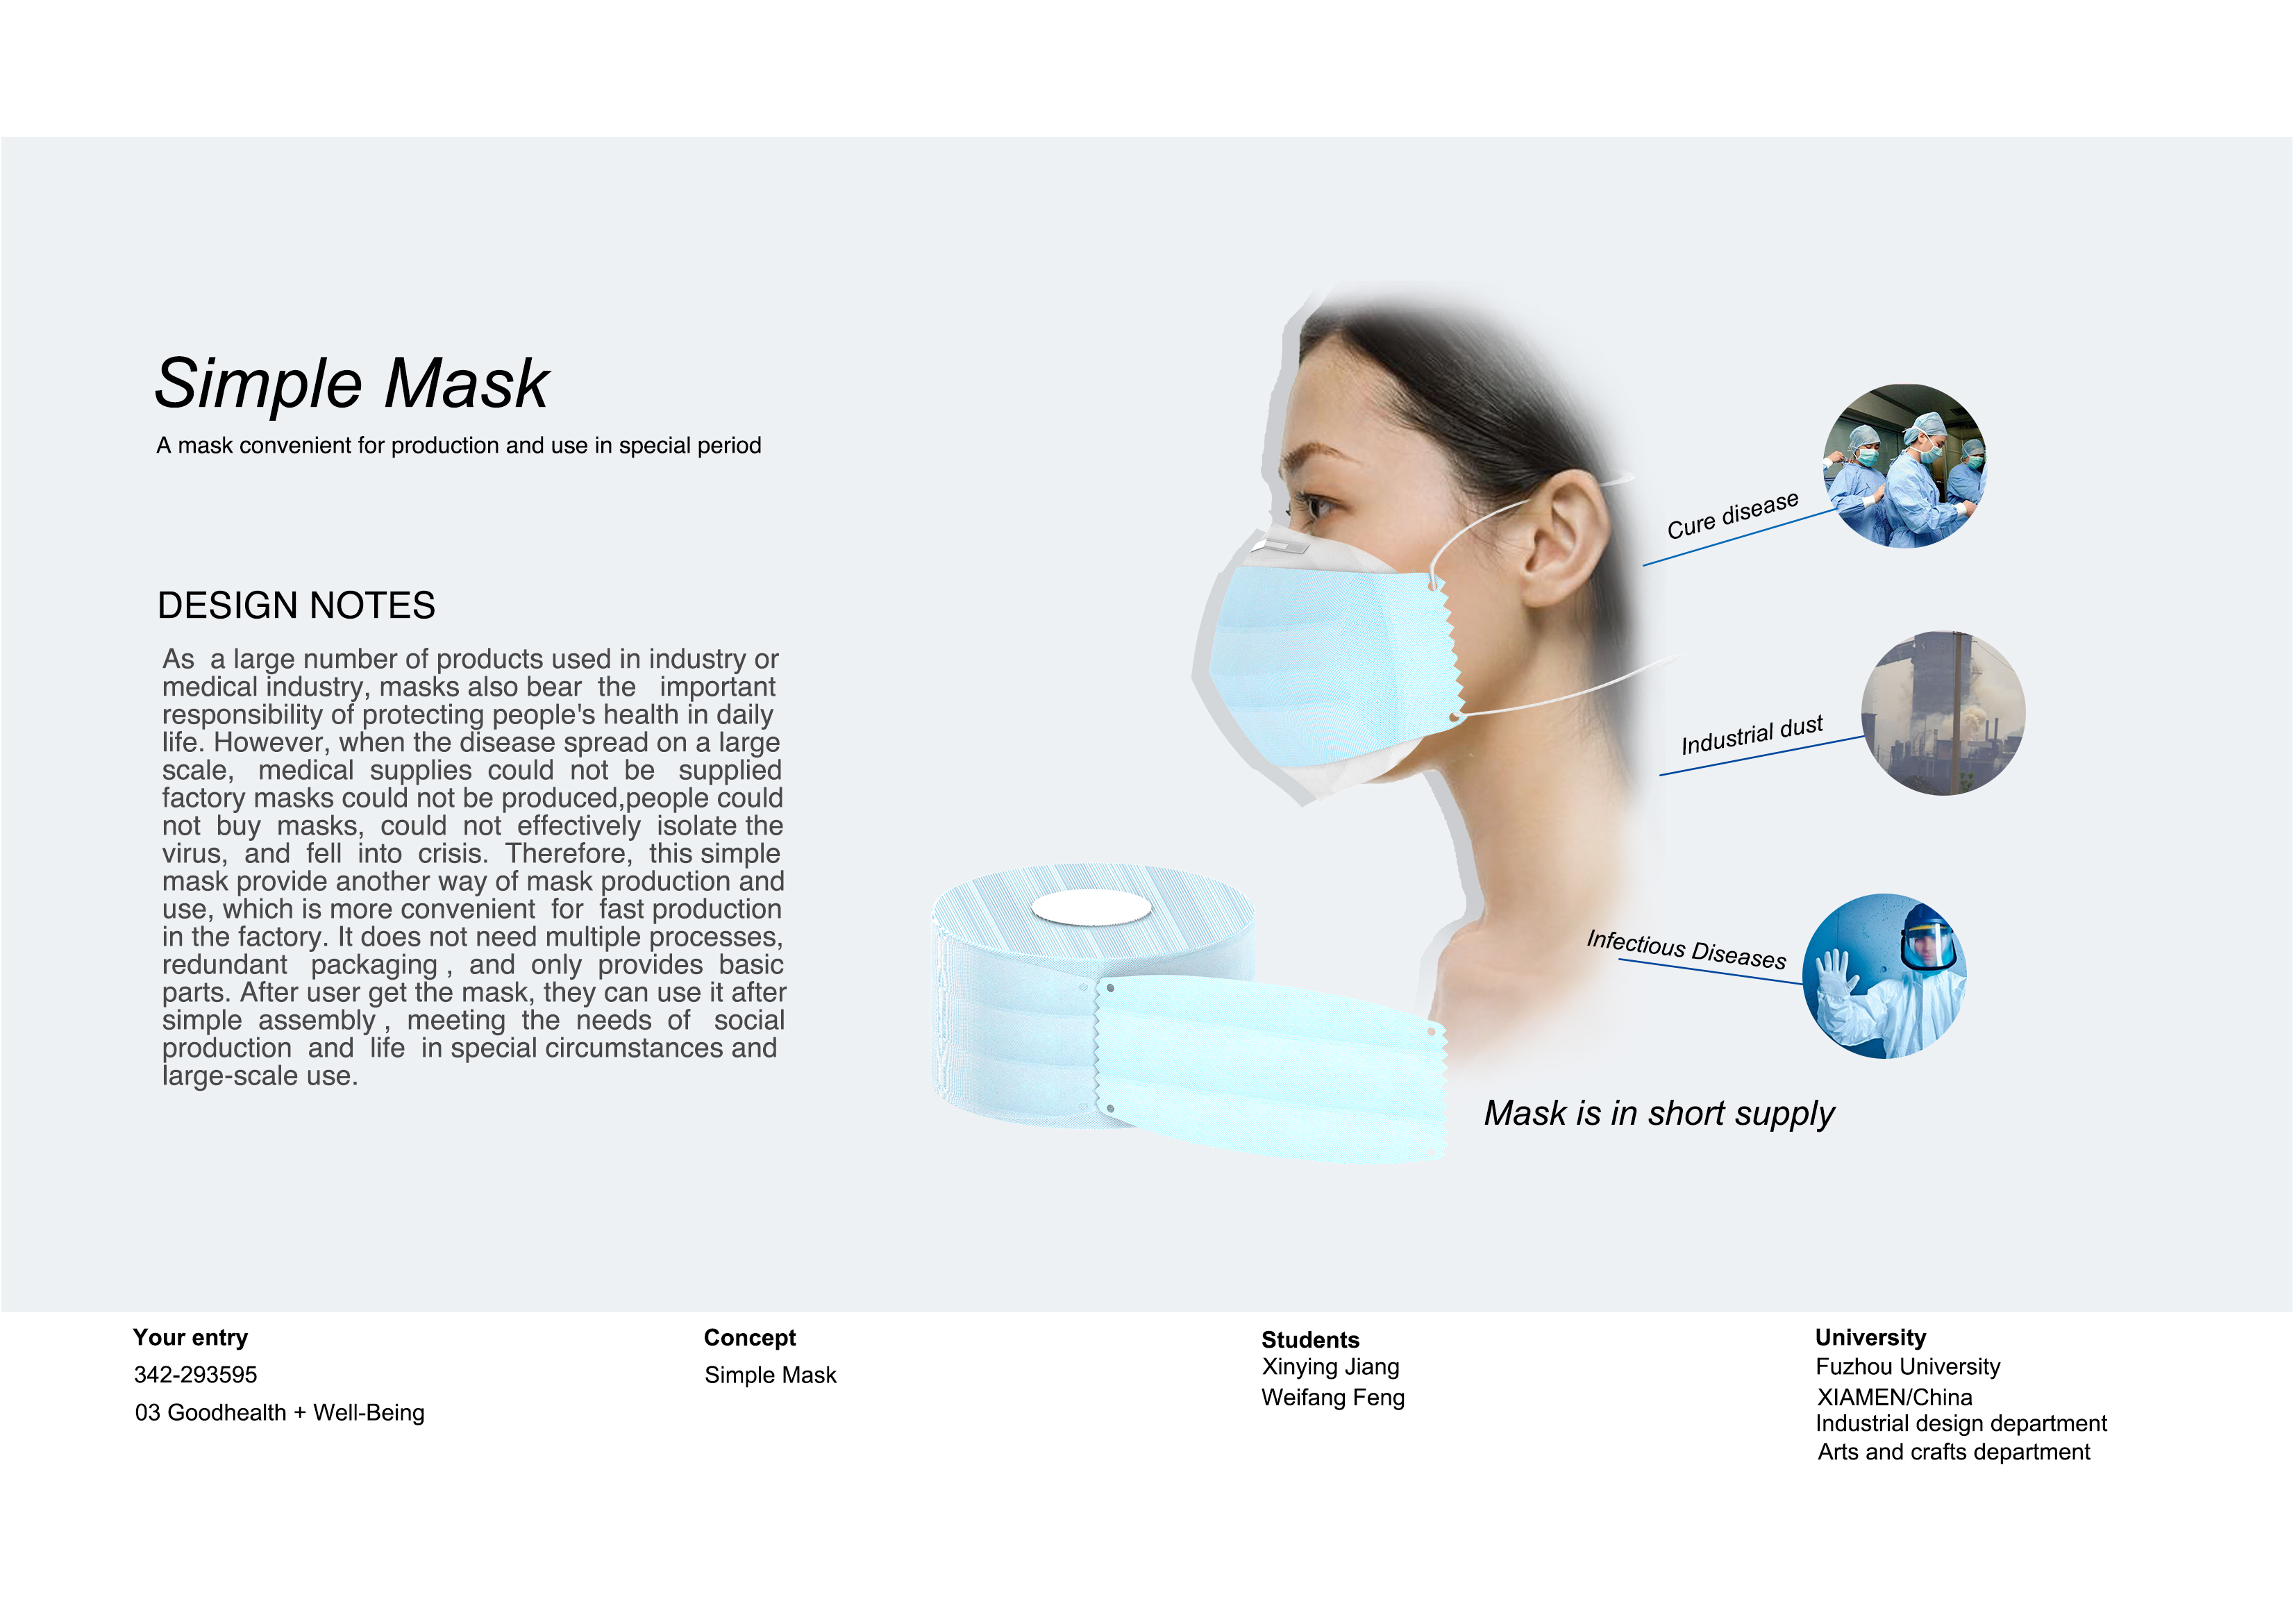 iF Design - Simple Mask